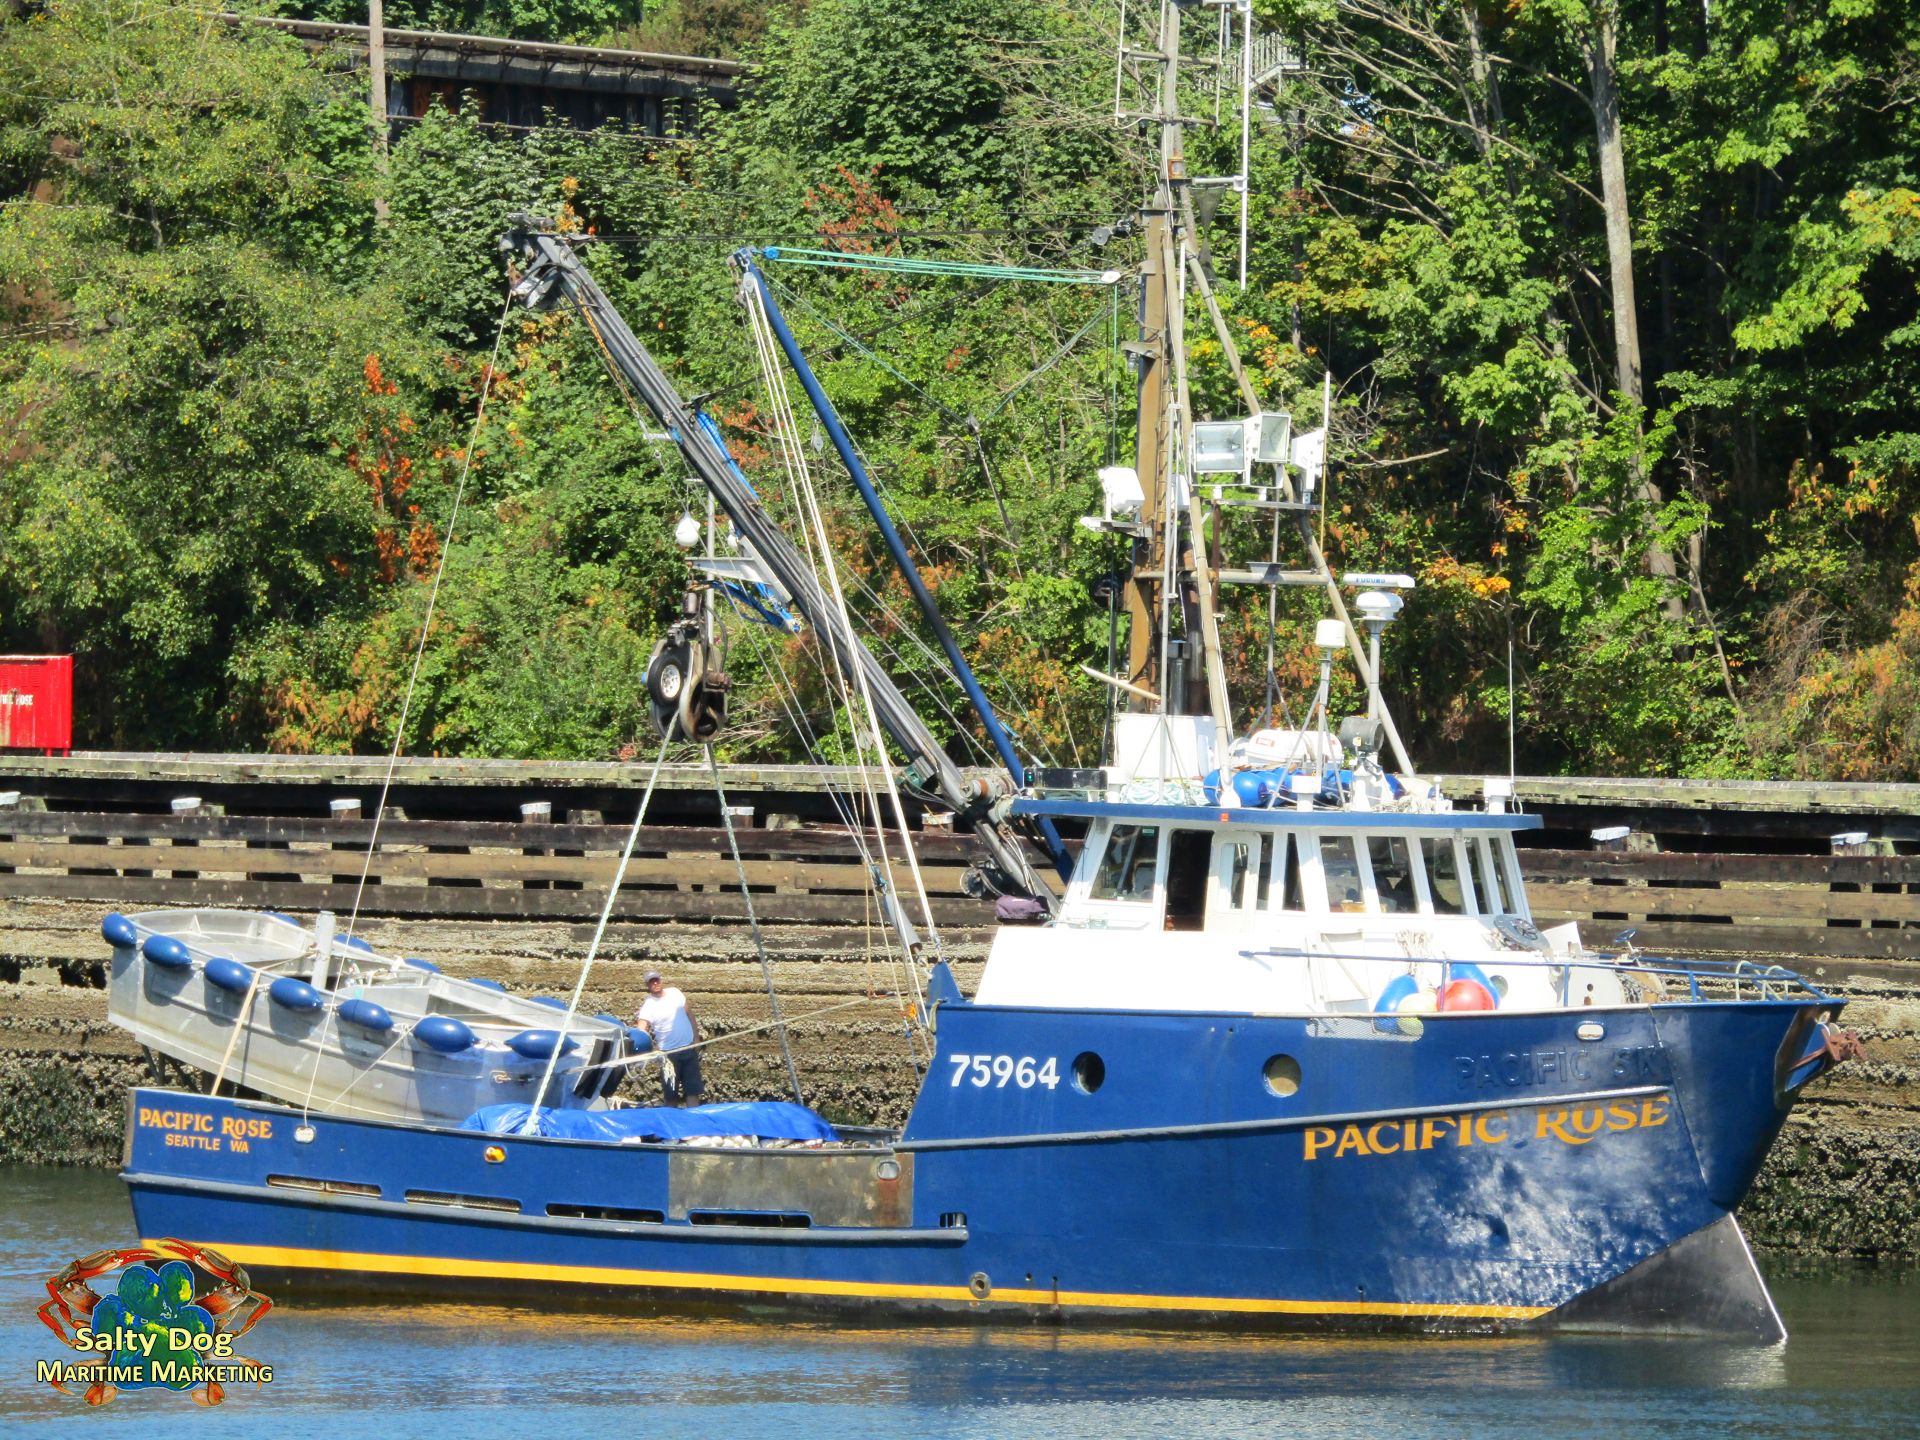 F/V Pacific Rose, Alaska Purse Seine Fishing Boat, Ballard Locks, Pacific  Rose is – One of the 1st AK Seiners Home, To Fishermen's Terminal they go…  Commercial Fishing Photography By: Salty Dog